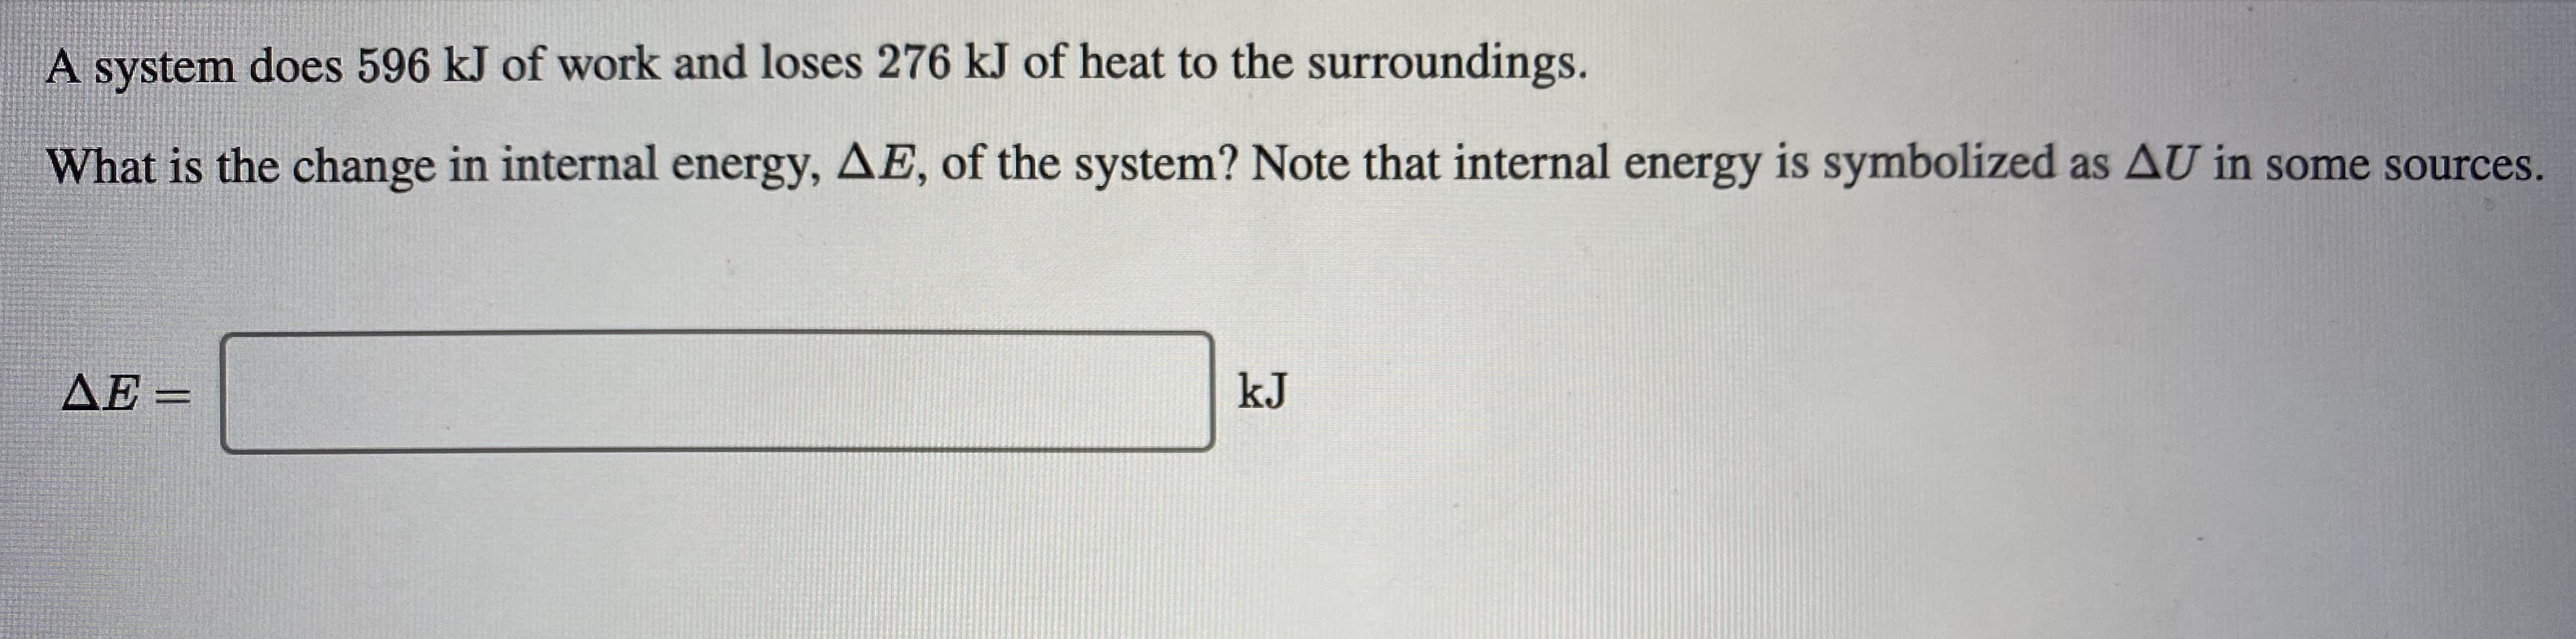 A system does 596 kJ of work and loses 276 kJ of heat to the surroundings.
What is the change in internal energy, AE, of the system? Note that internal energy is symbolized as AU in some sources.
AE =
kJ
